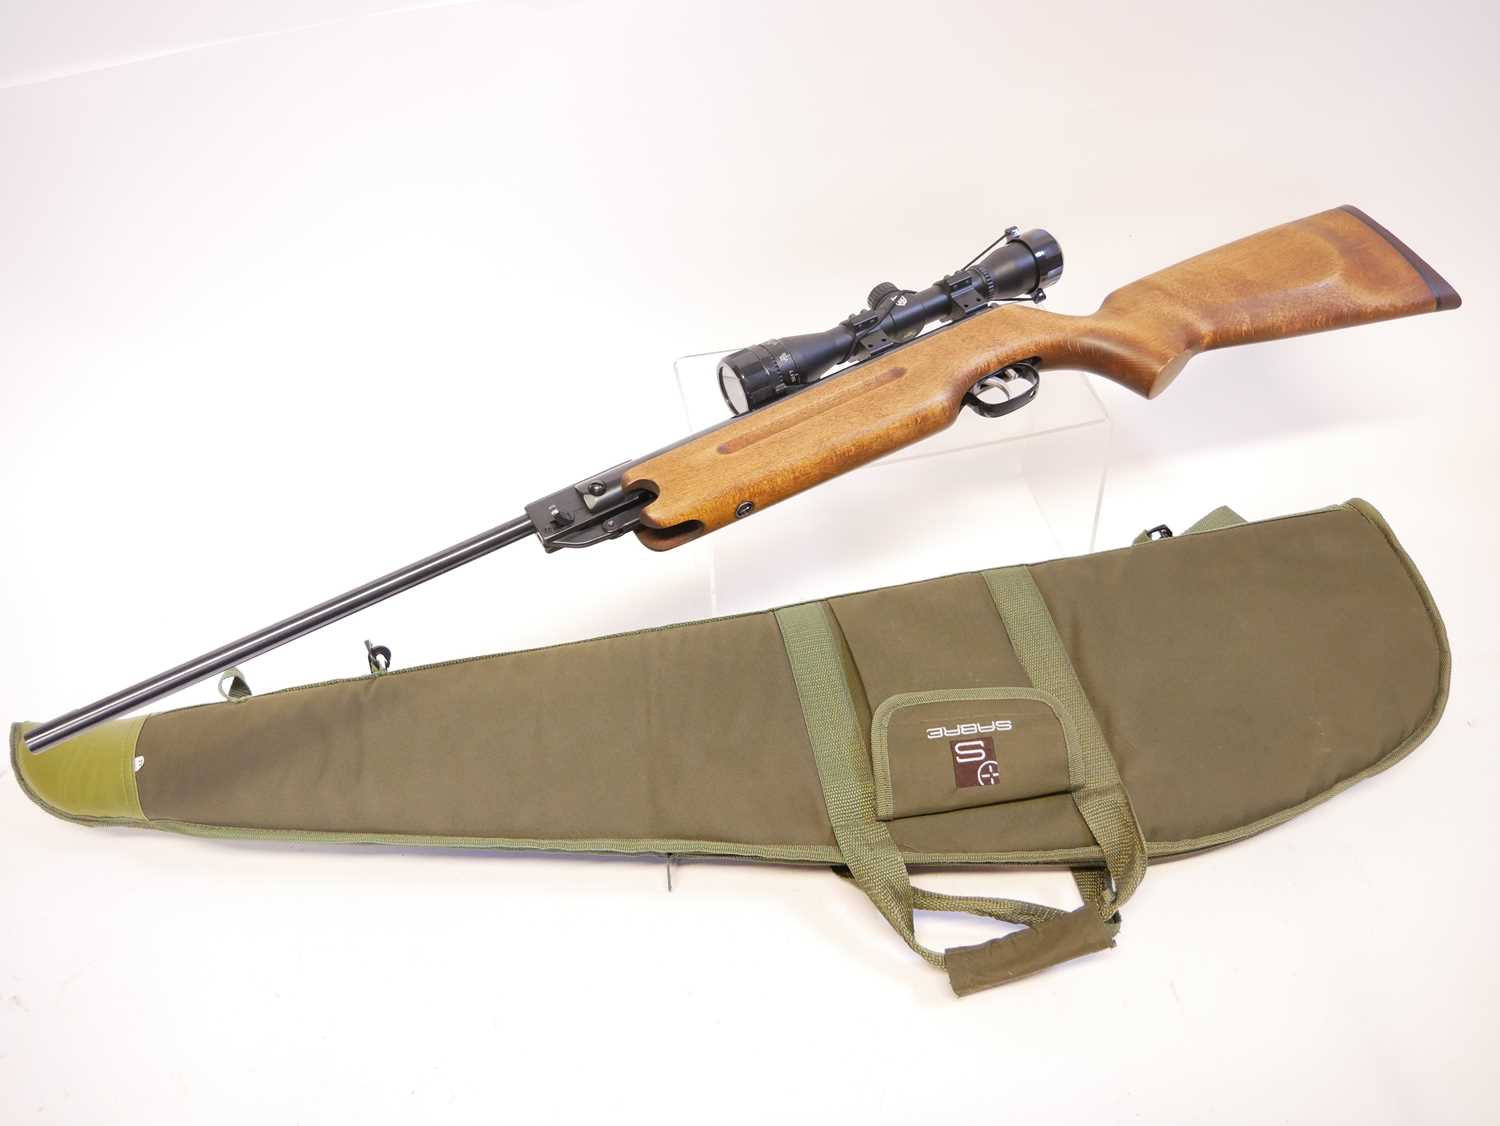 Weihrauch HW35 .22 air rifle, serial number 1478175, 16 inch break barrel, fitted with a Nikko - Image 10 of 13